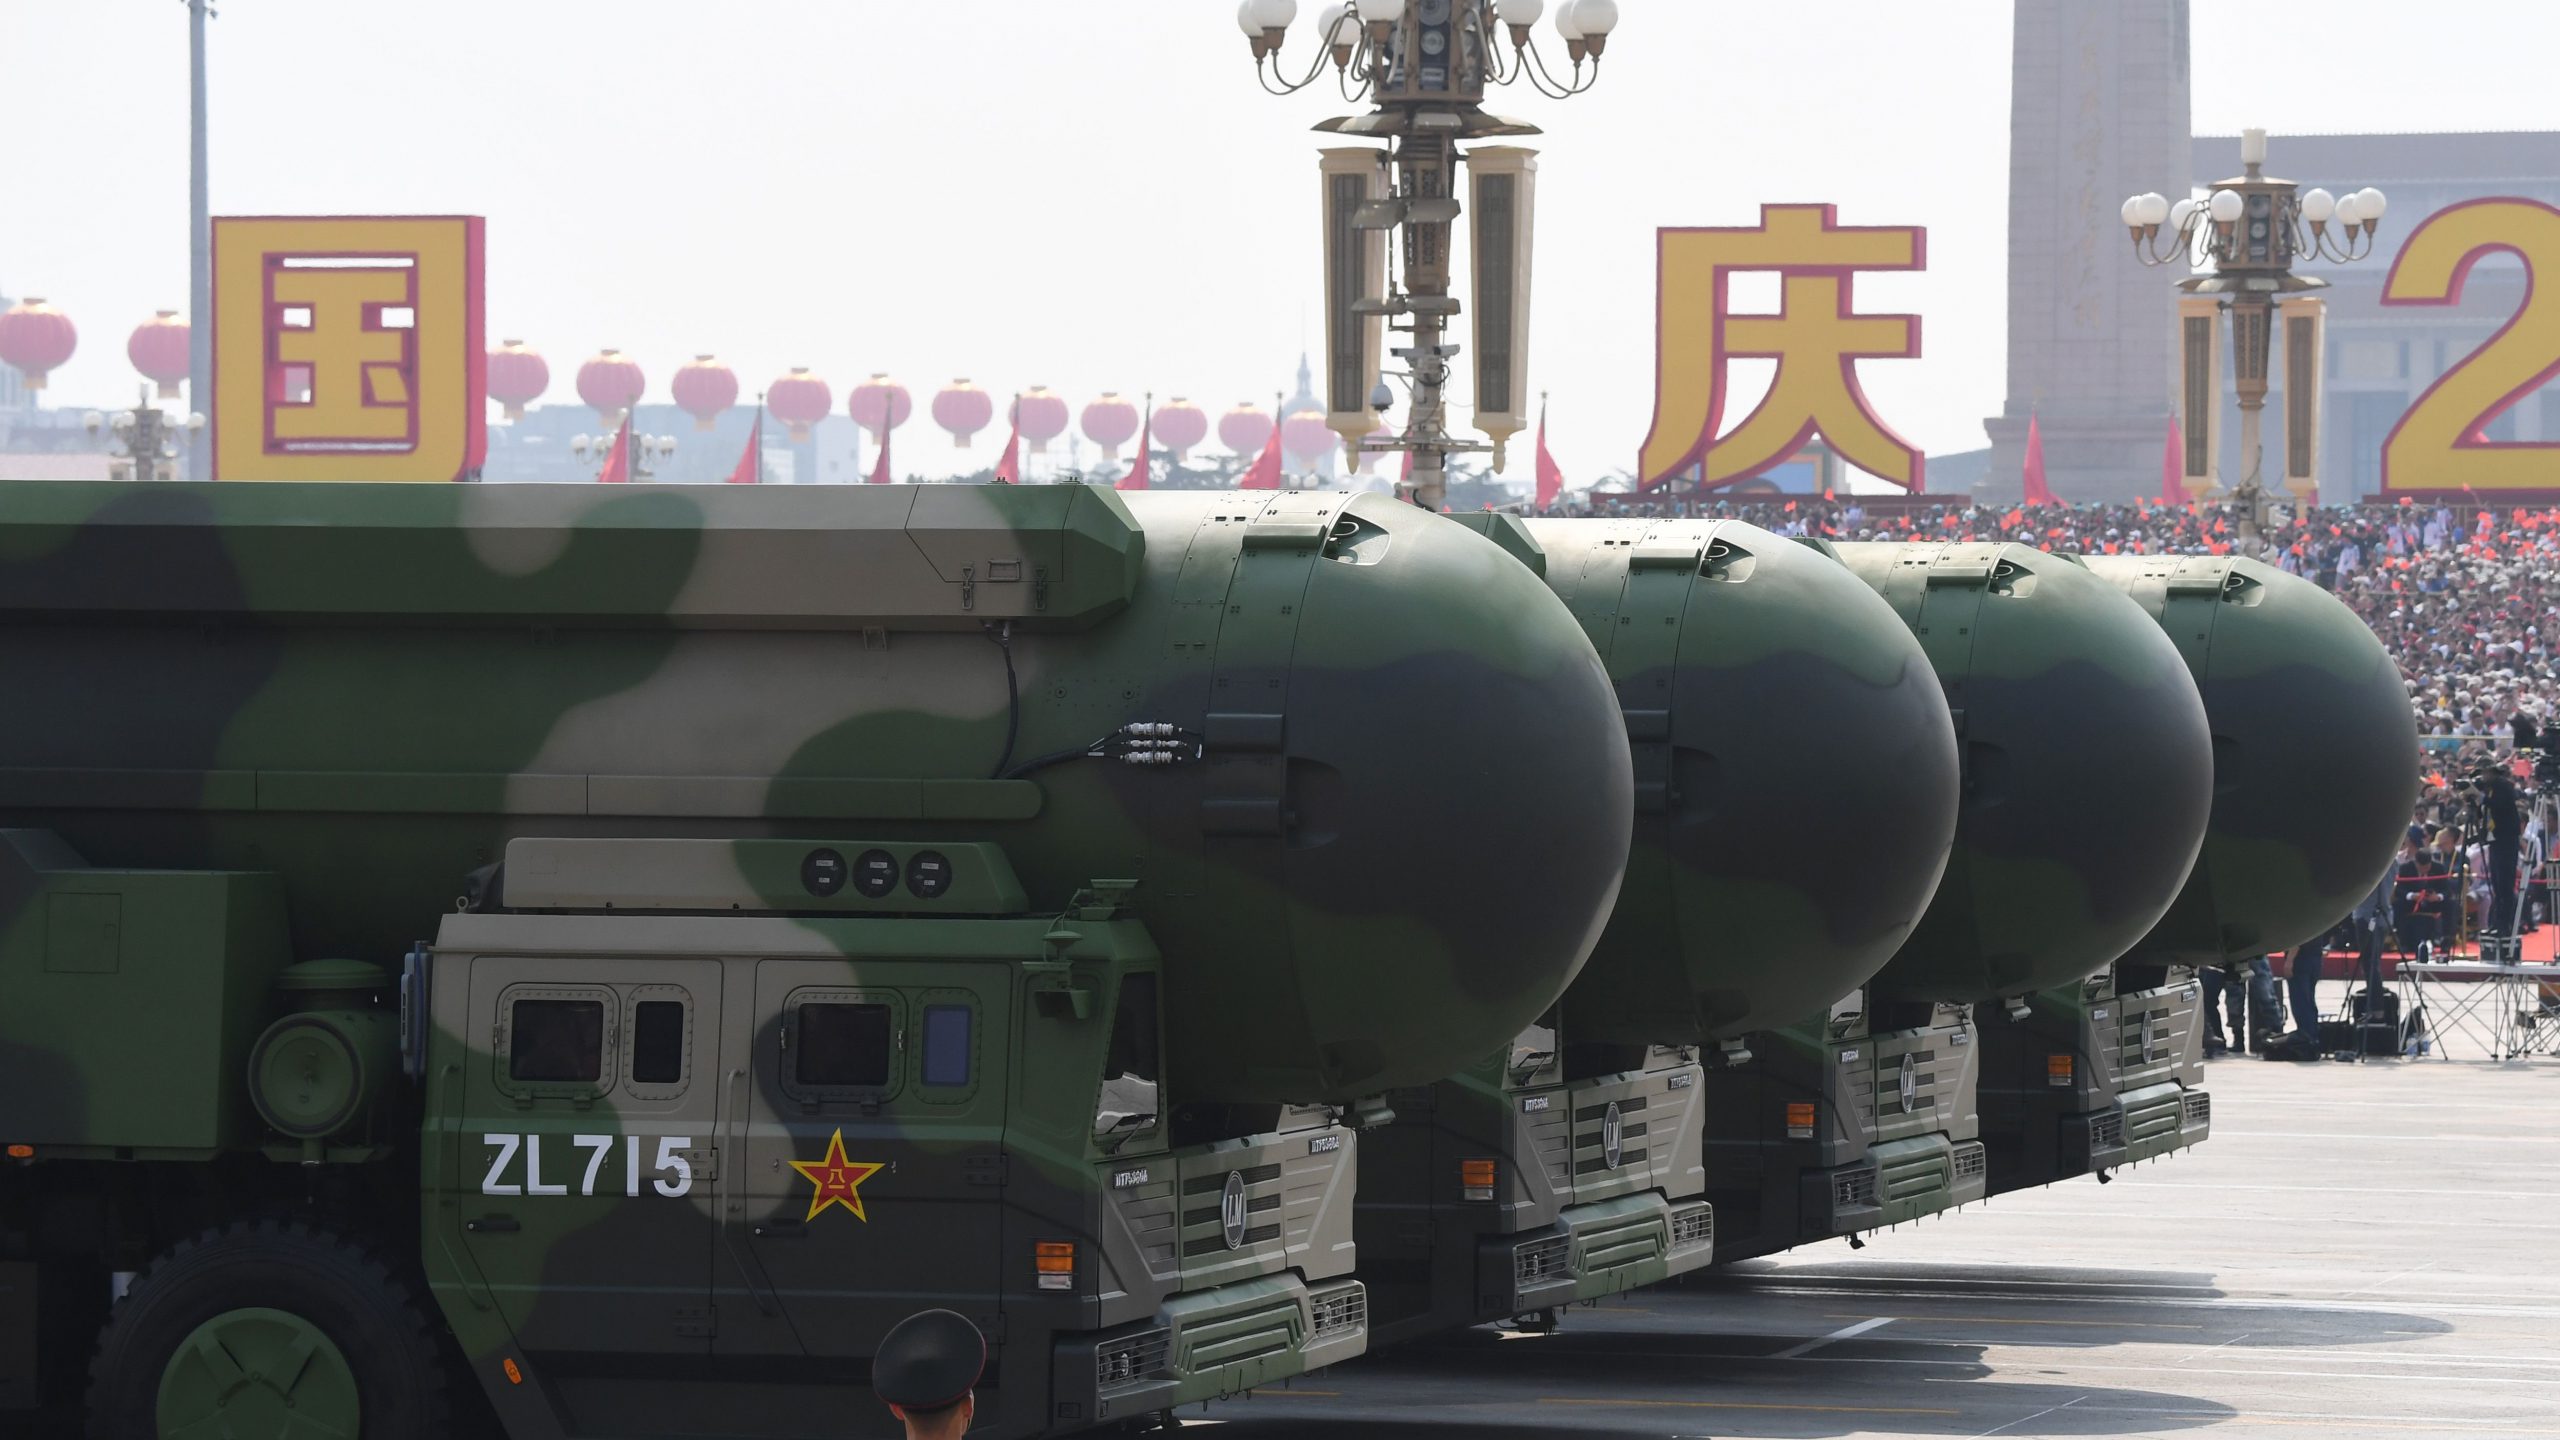 China's DF-41 nuclear-capable